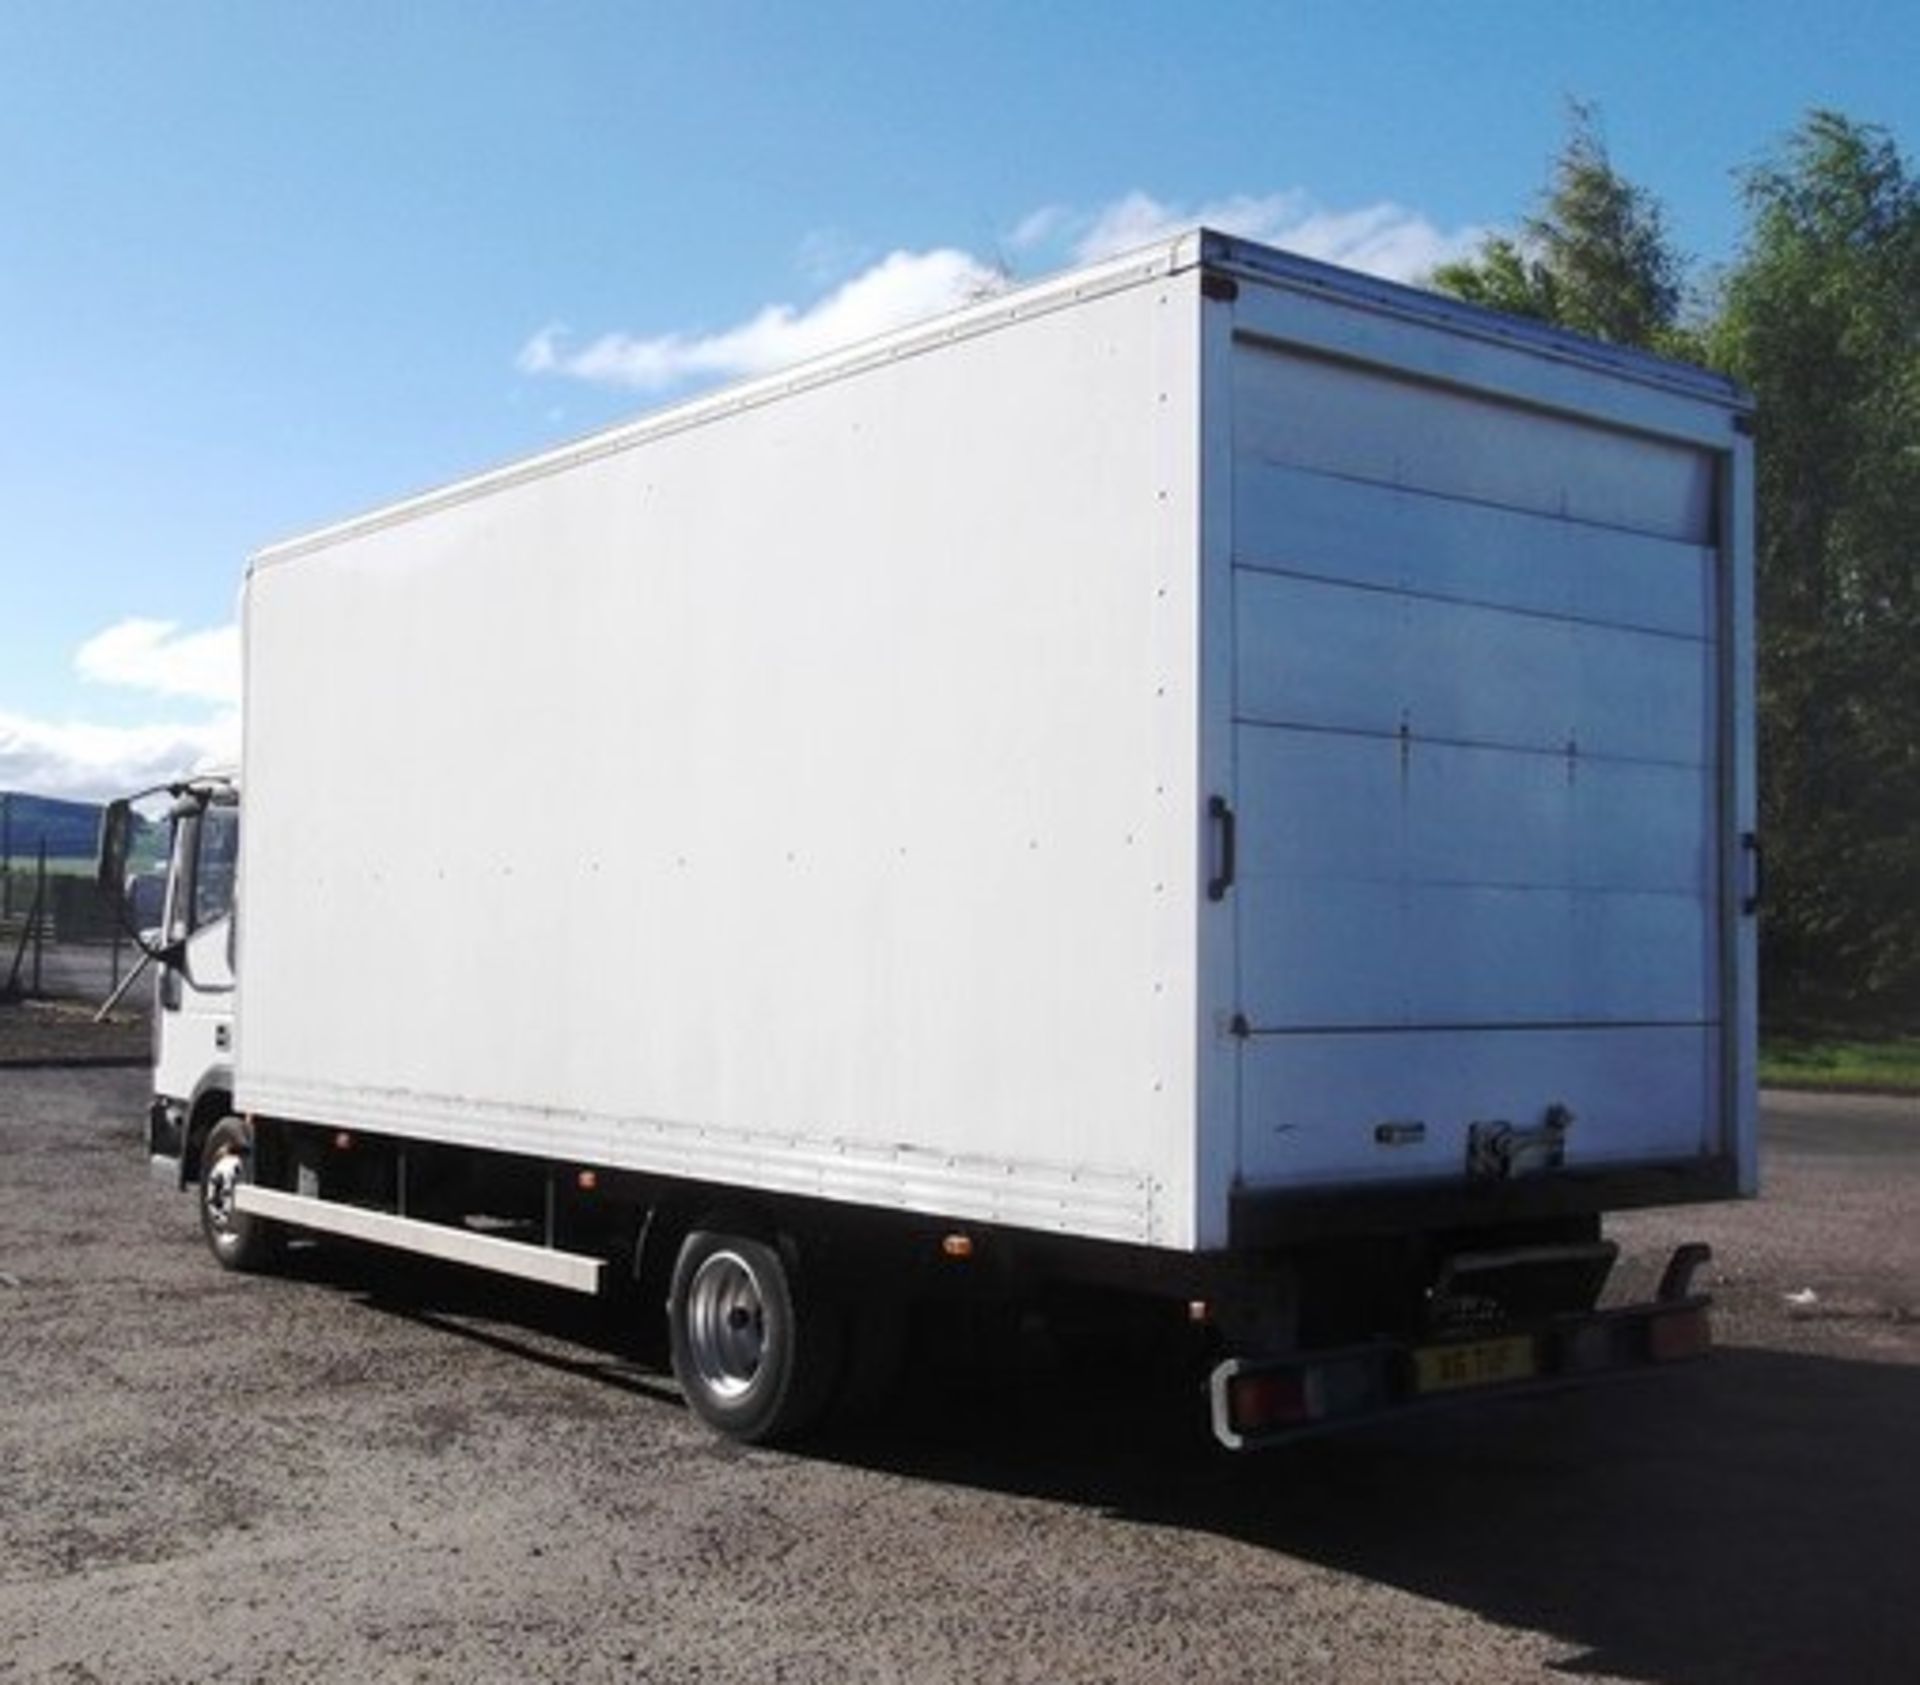 IVECO-FORD CARGO TECTOR - 3920cc
Body: 2 Dr Van
Color: White
First Reg: 05/03/2004
Doors: 2
MOT: - Image 15 of 20